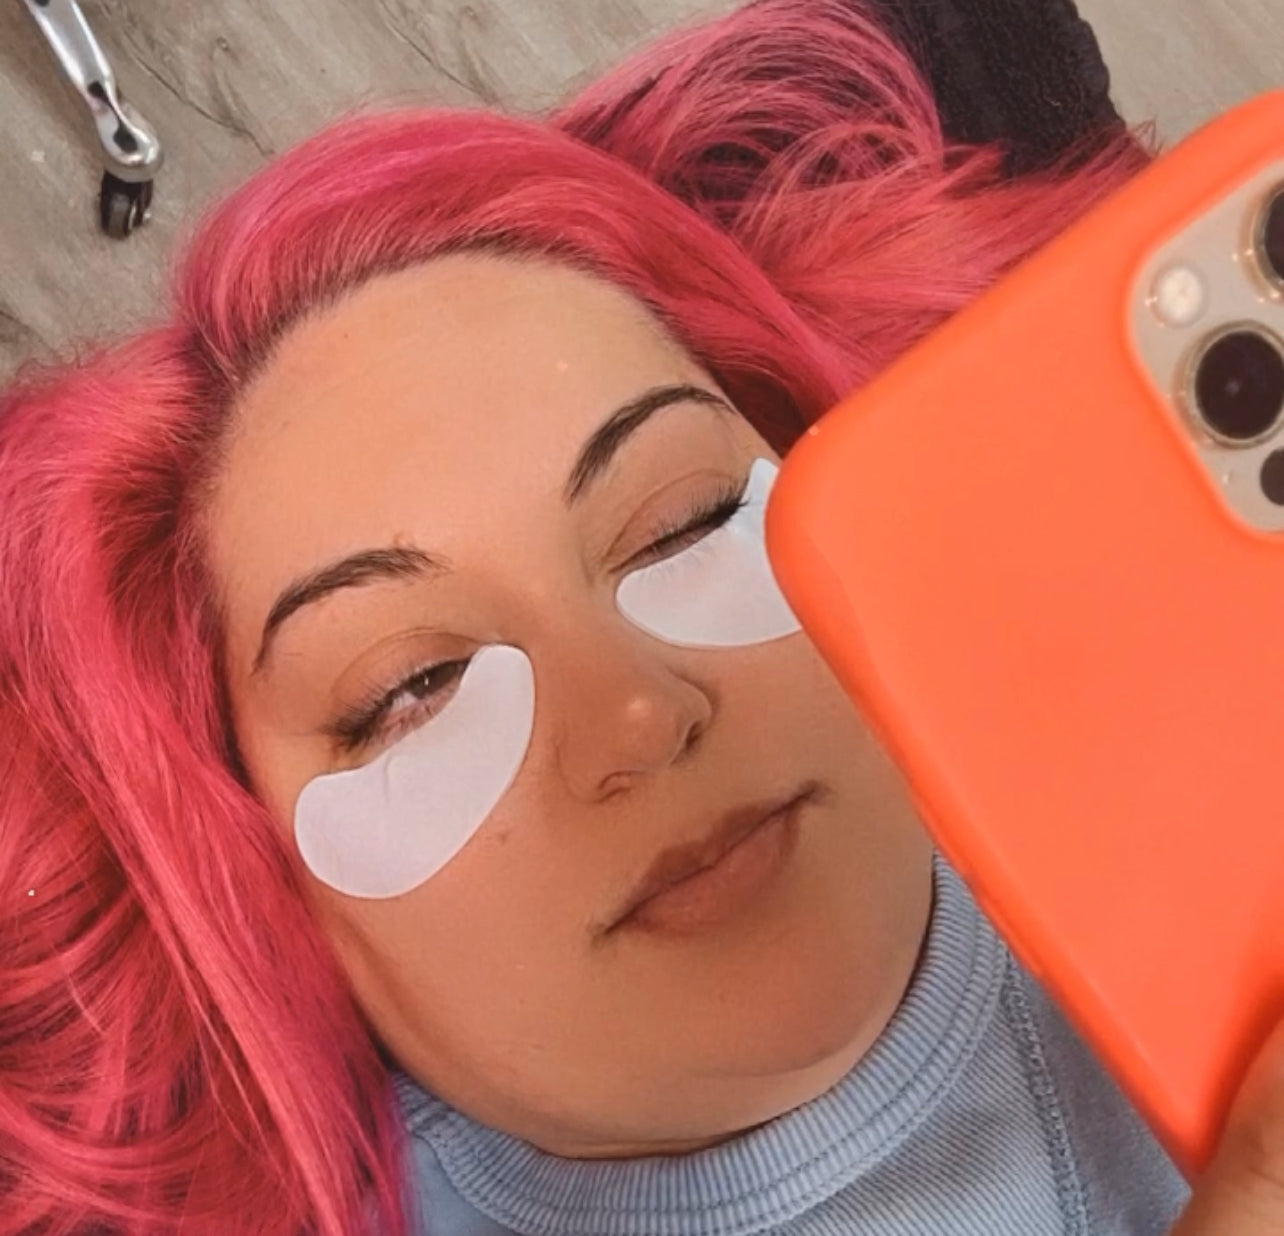 Girl with eyes slightly open while wearing under eye pads